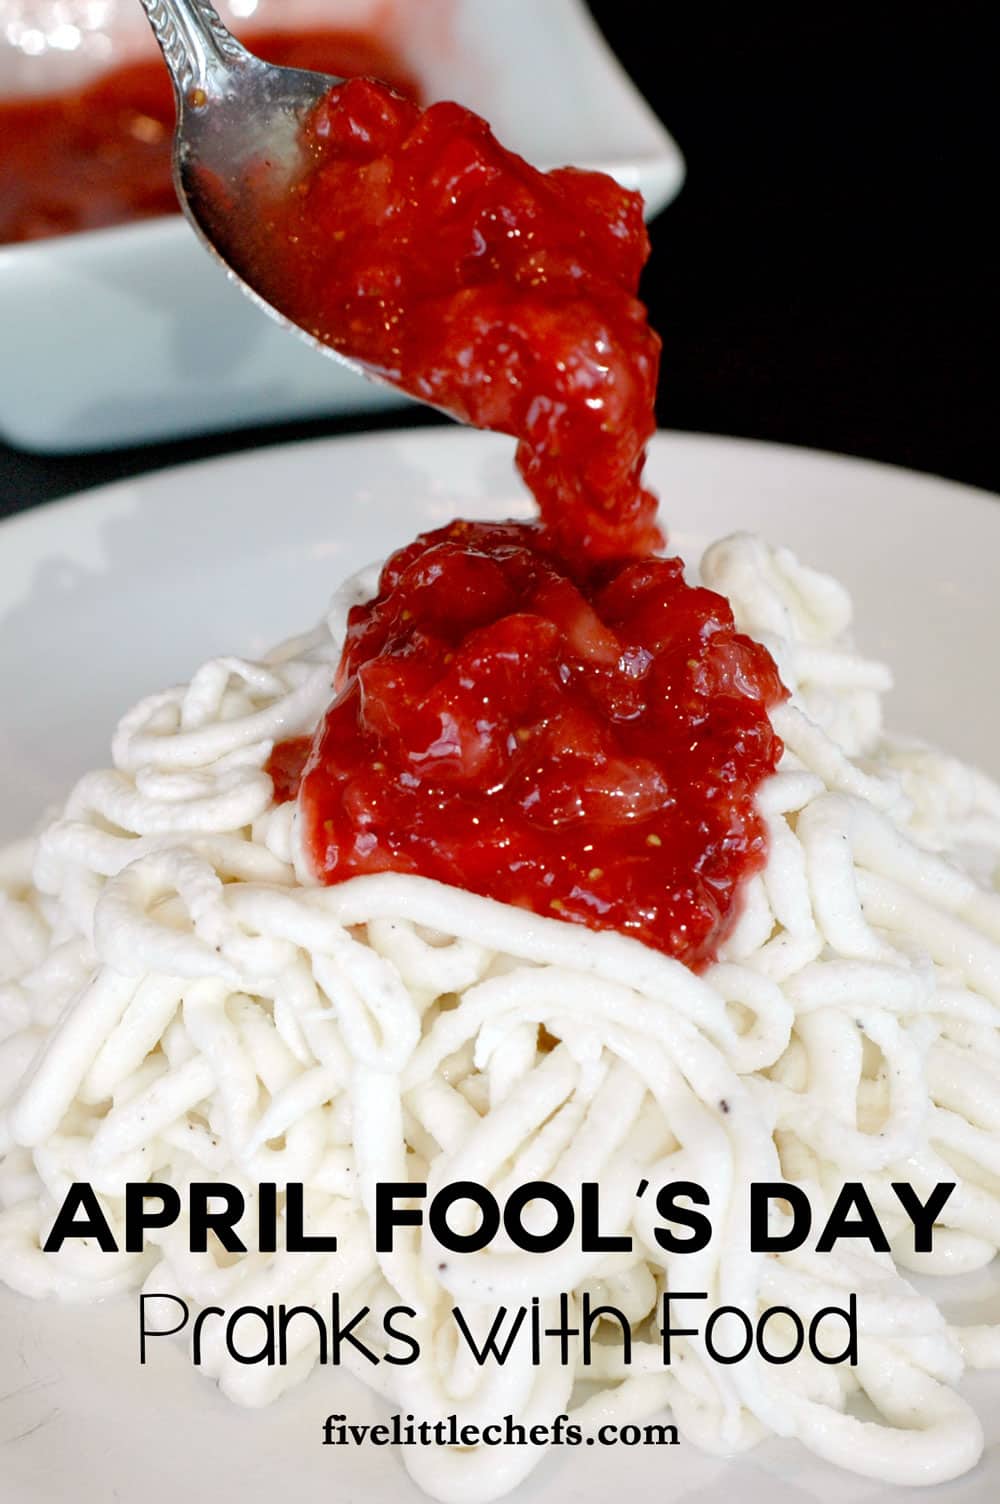 10 great April Fool's Day food pranks for kids. These fun ideas are great for families and friends. Invite them over for dinner this year!